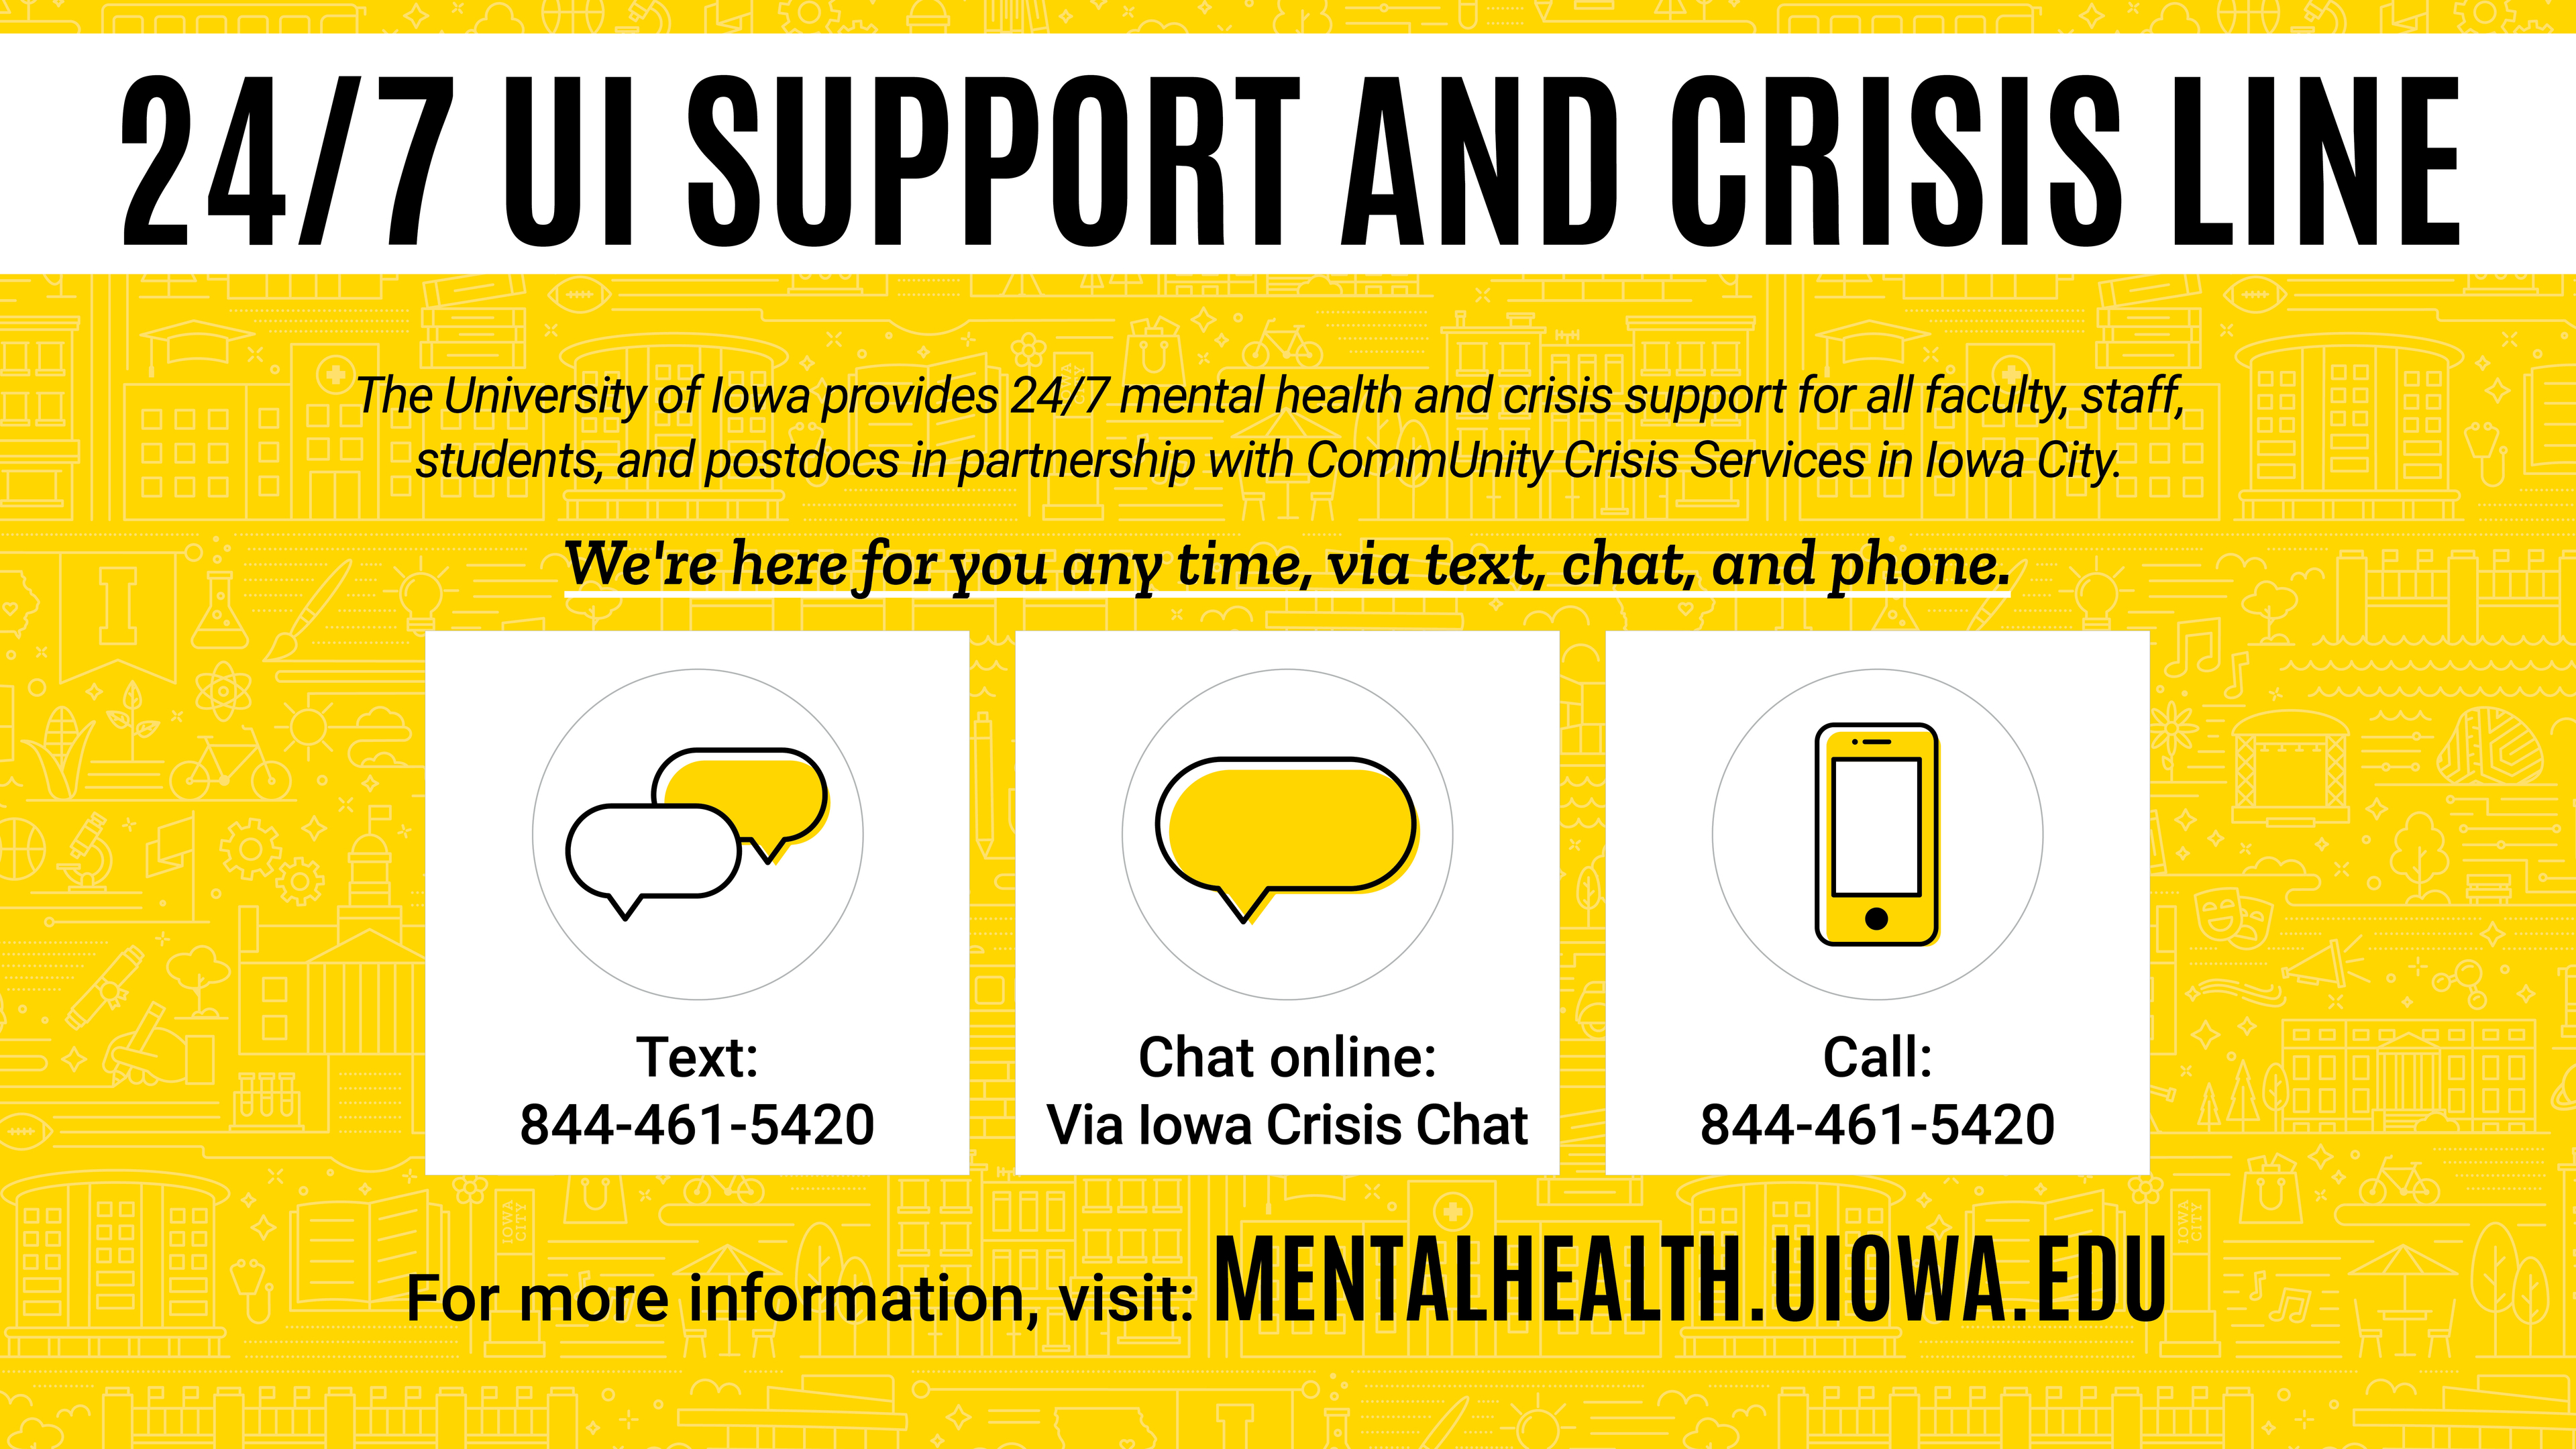 27/7 UI Support and Crisis Line available for faculty, staff, students, and post docs at 844-461-5420